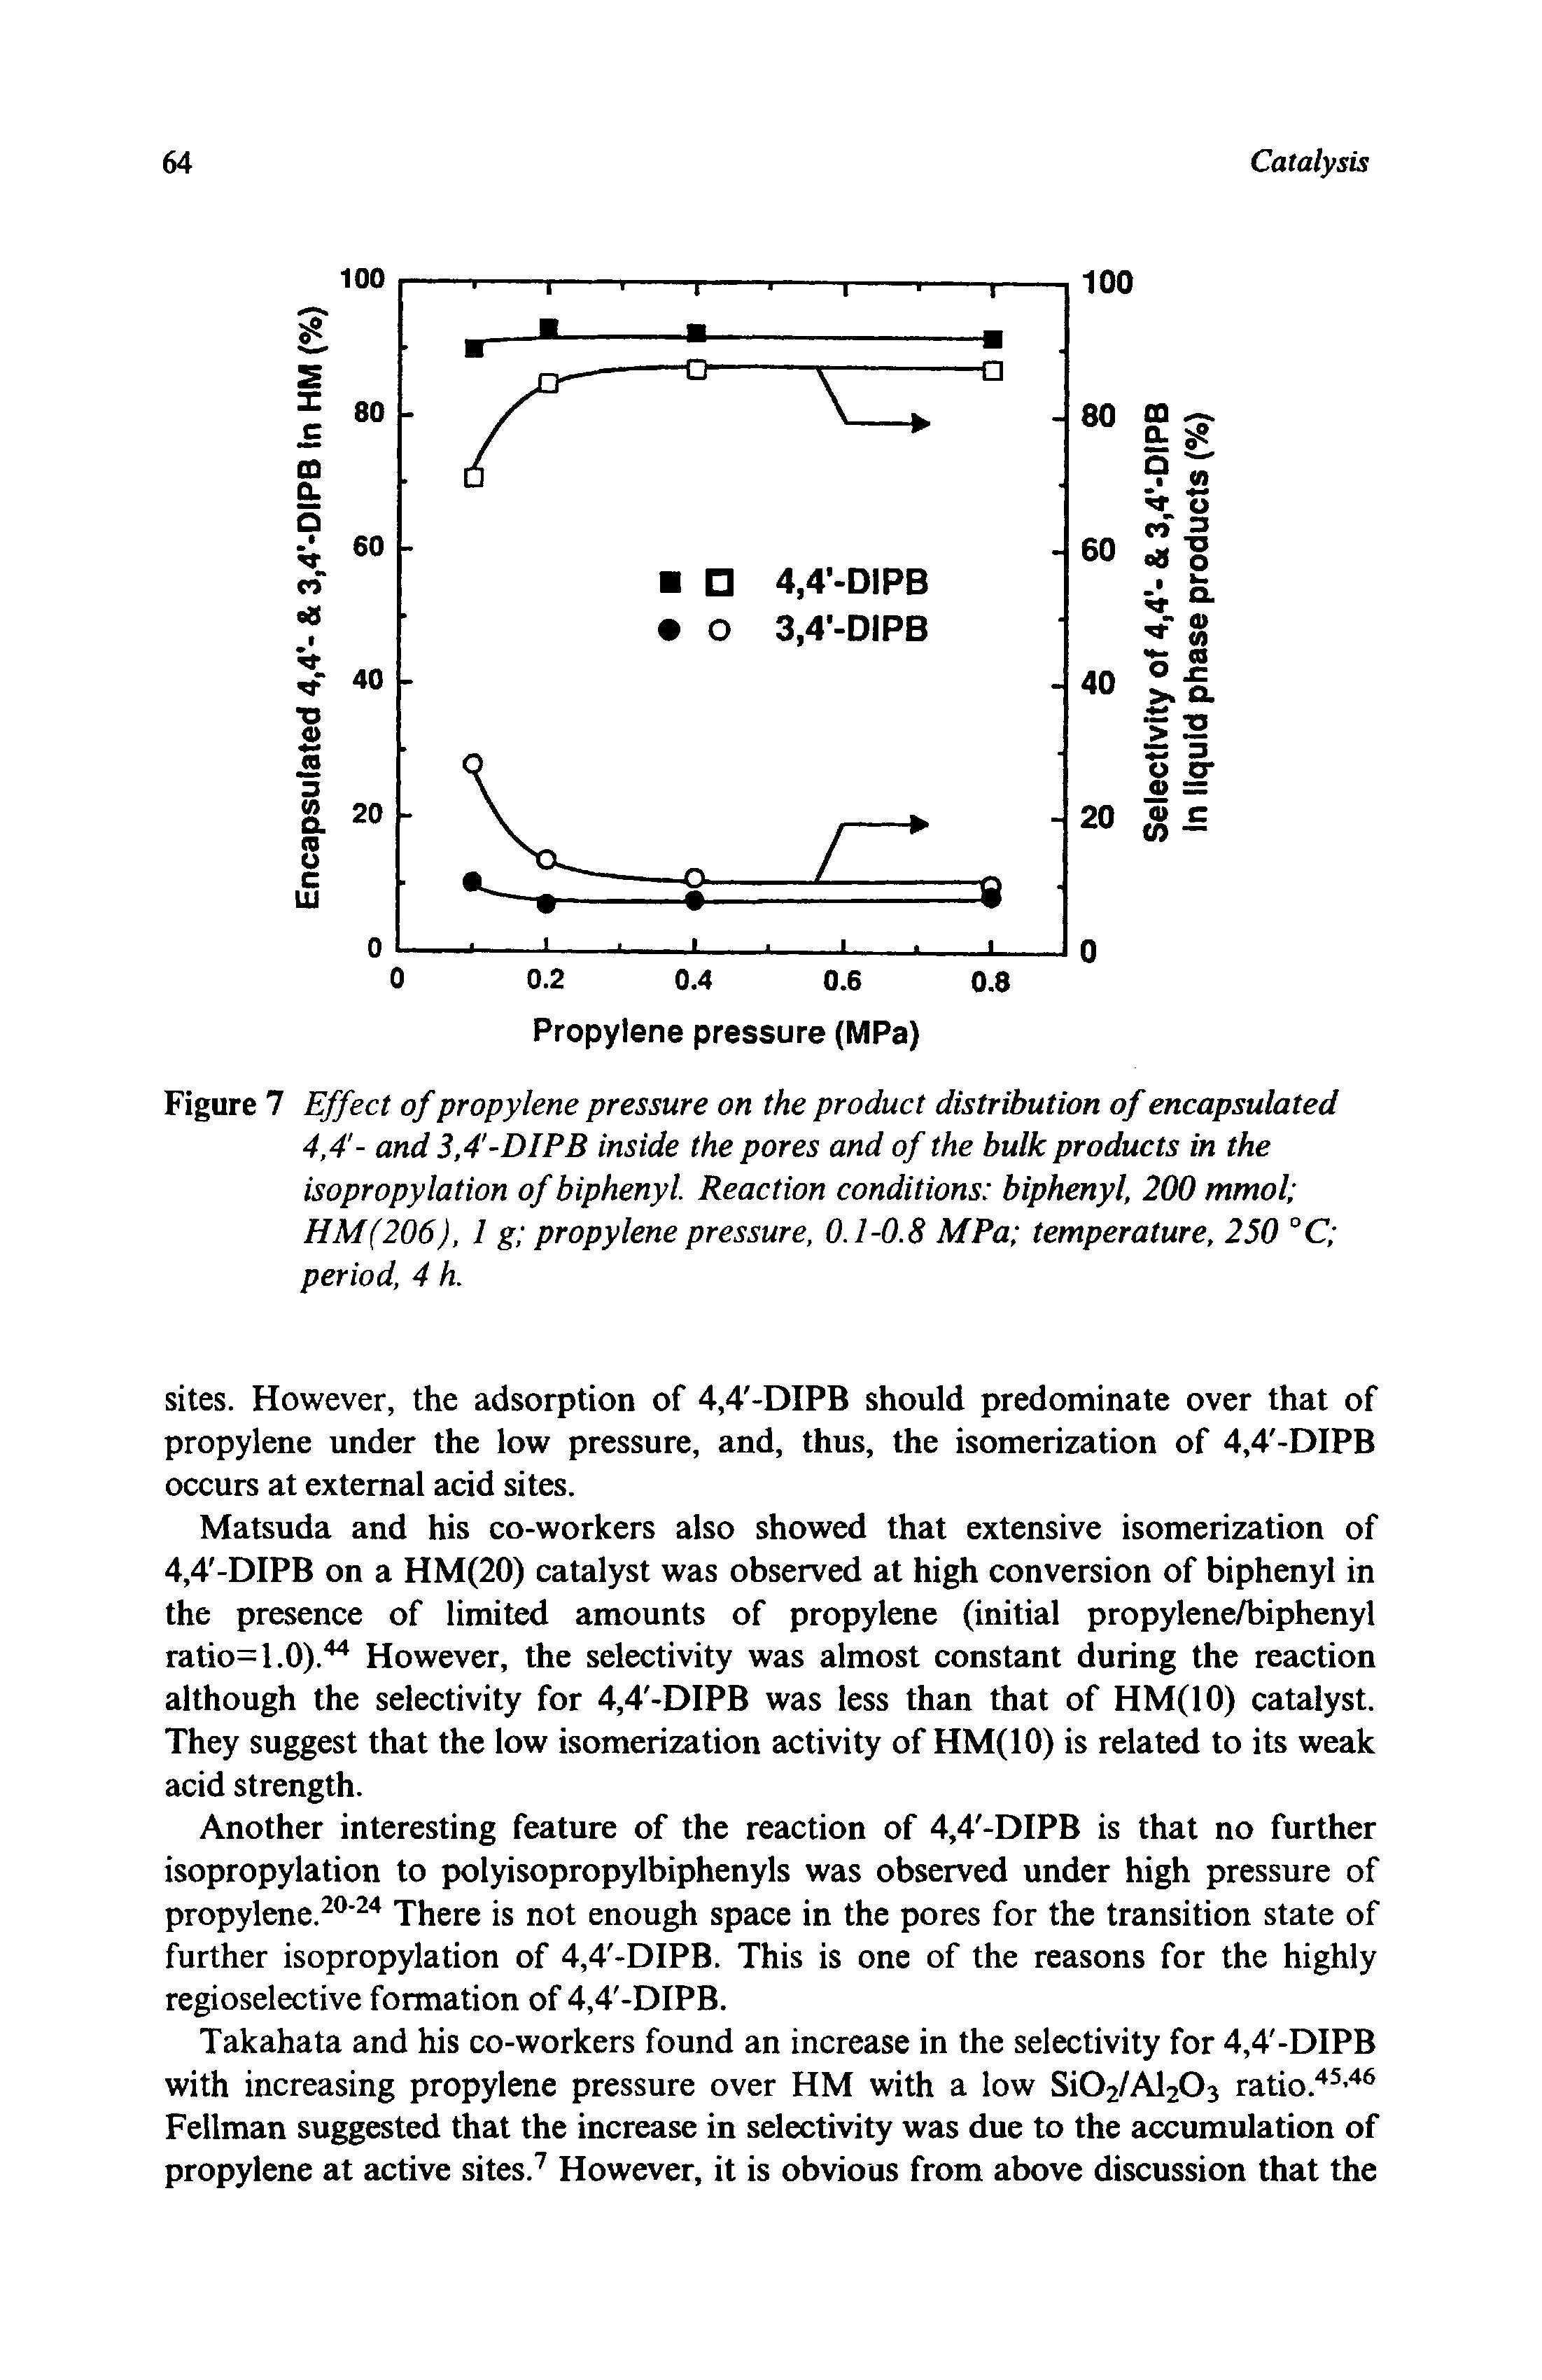 Figure 7 Effect of propylene pressure on the product distribution of encapsulated 4,4 - and 3,4 -DIPB inside the pores and of the bulk products in the isopropylation of biphenyl. Reaction conditions biphenyl, 200 mmol HM(206), 1 g propylene pressure, 0.1-0.8 MPa temperature, 250 °C period, 4 h.